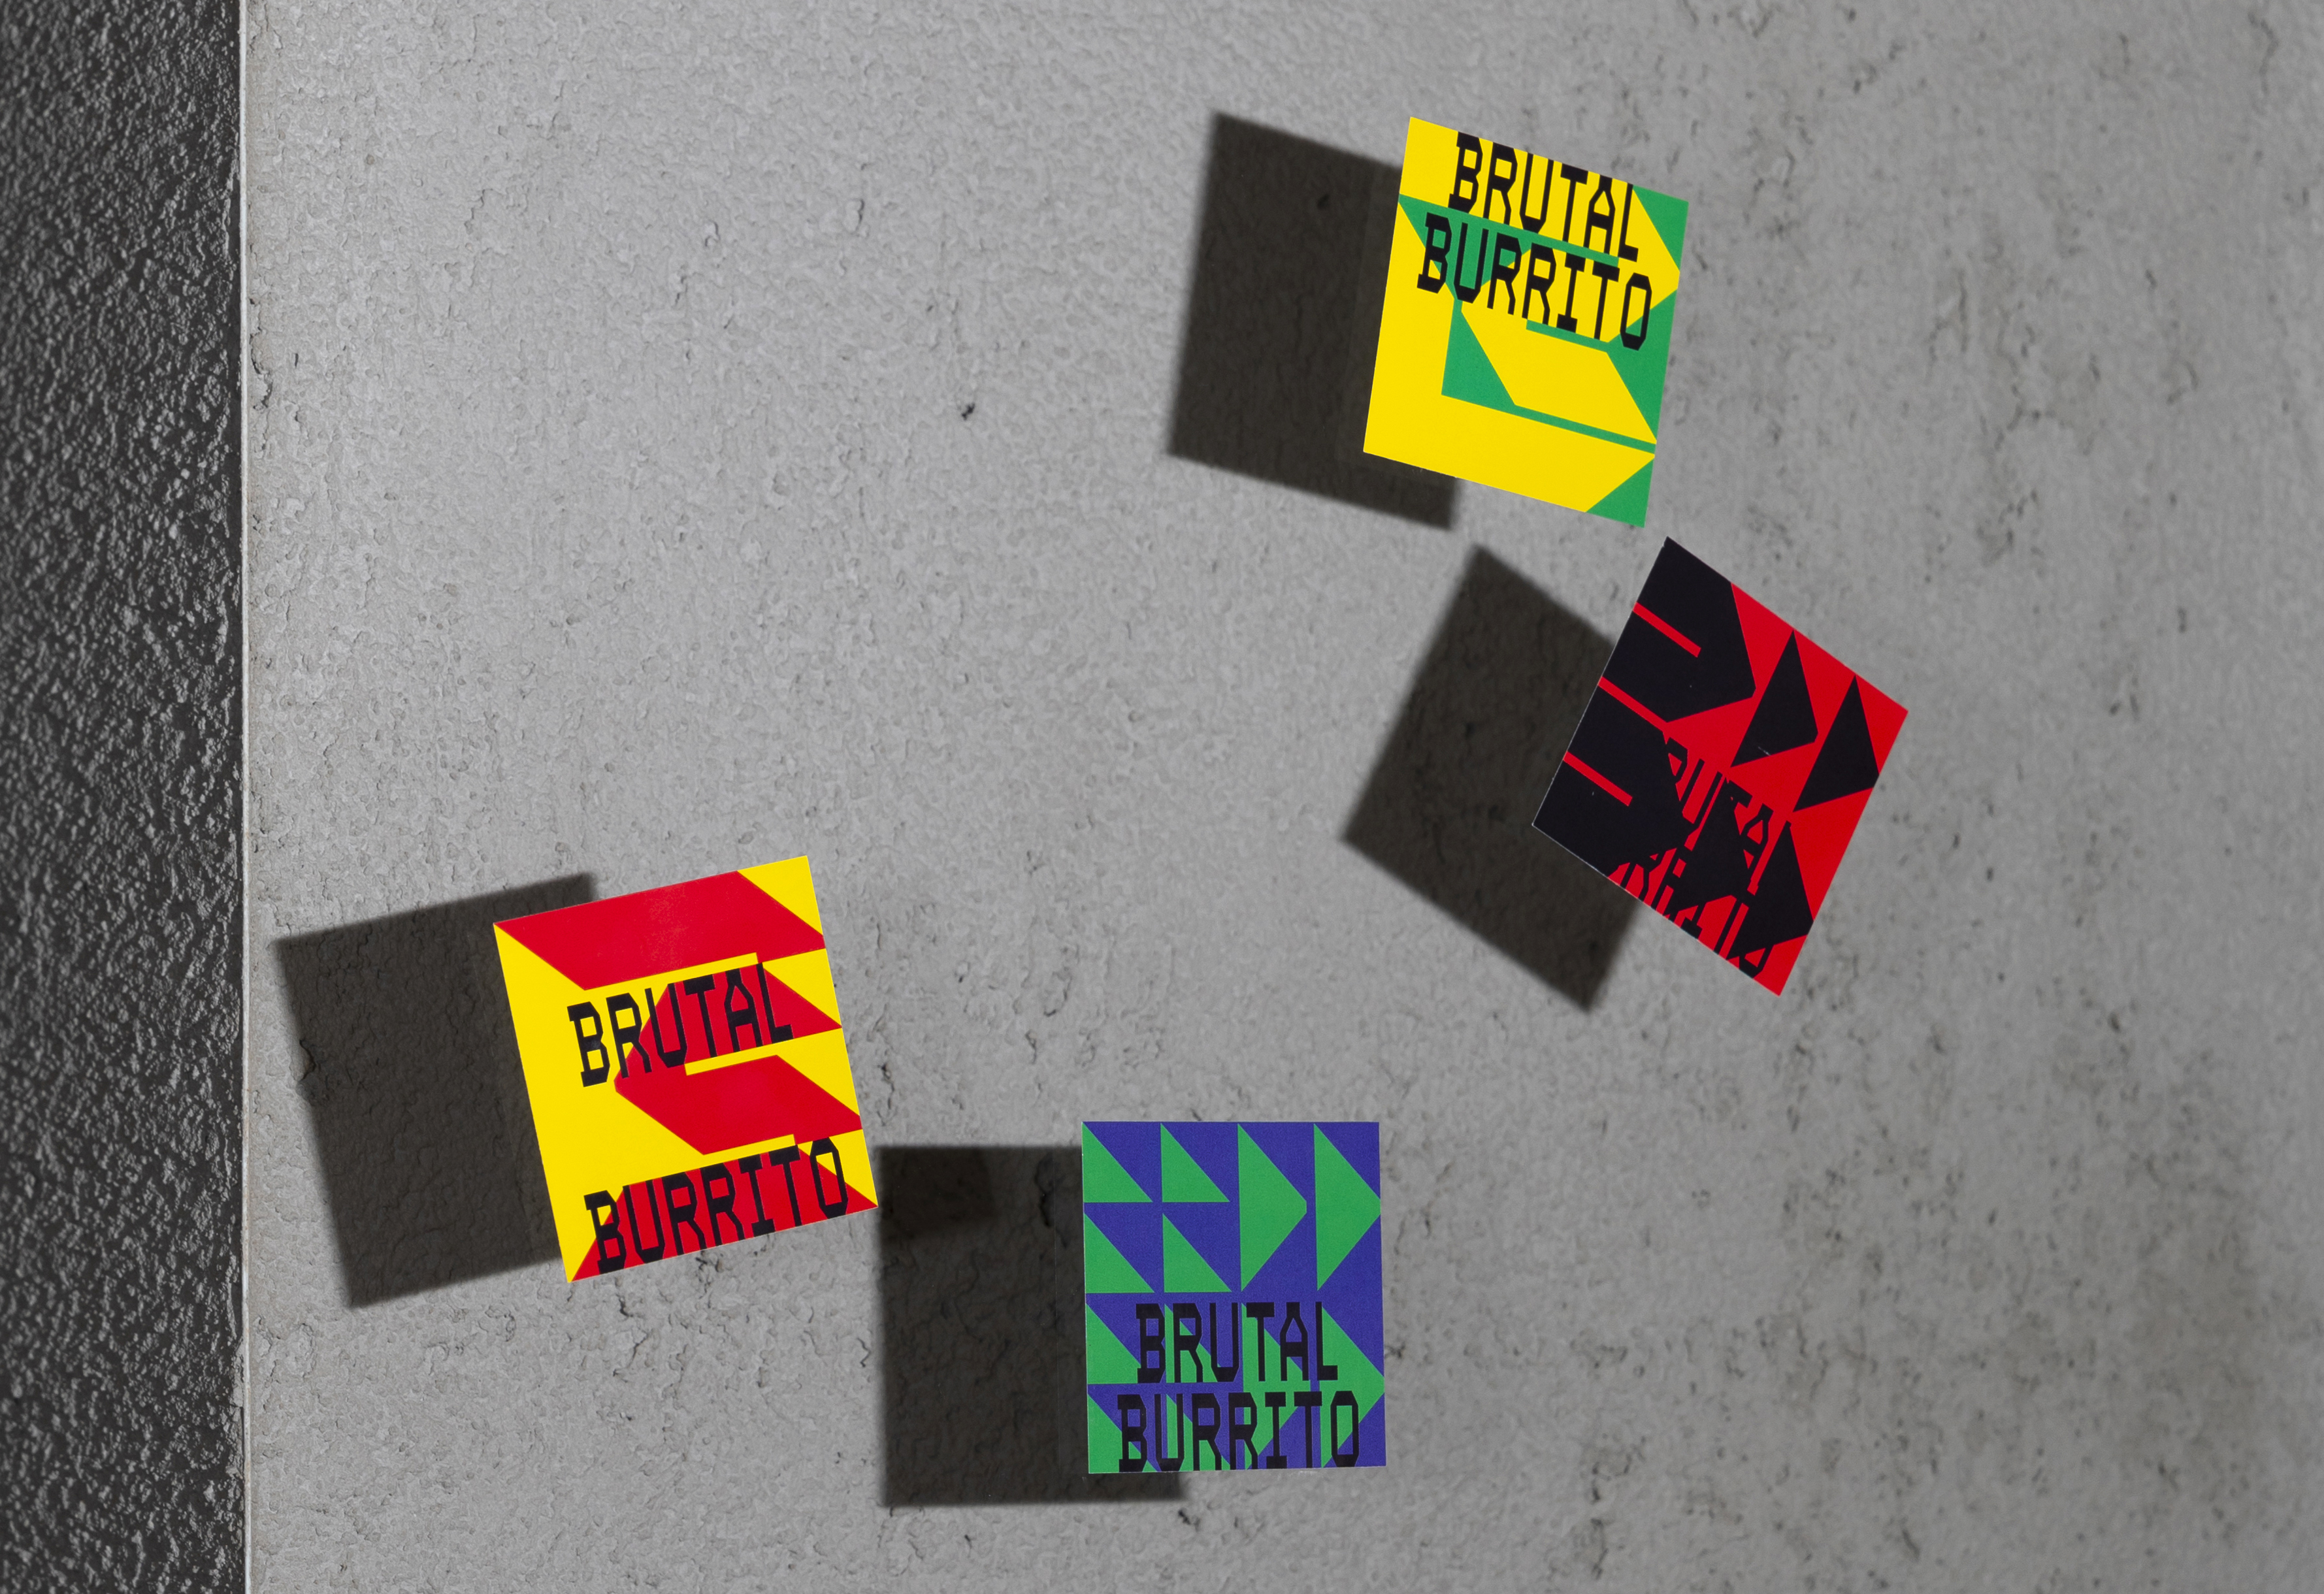 New brand identity for the Madrid-based burritos and fast food business Brutal Burrito by Tres Tipos Gráficos